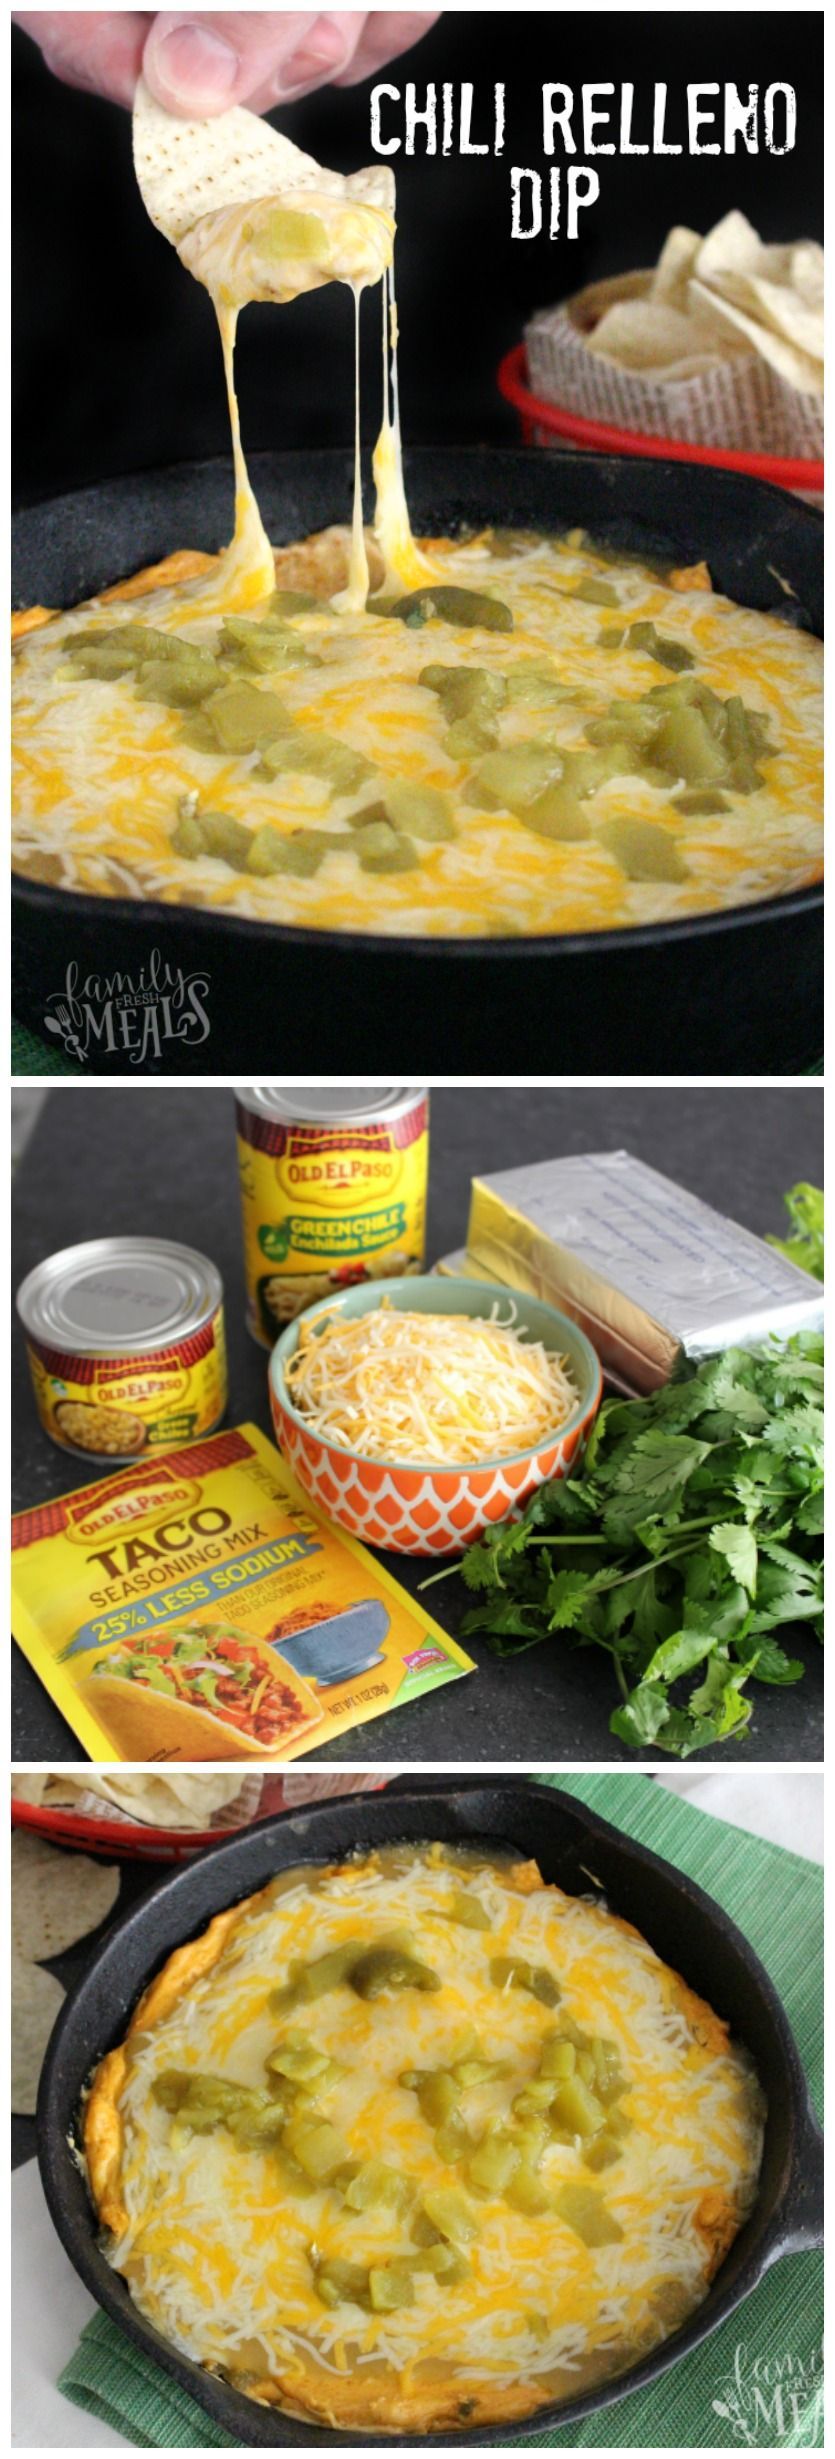 Chili Relleno Dip Recipe – Easy dip recipe to please a crowd! Love this one for Ci